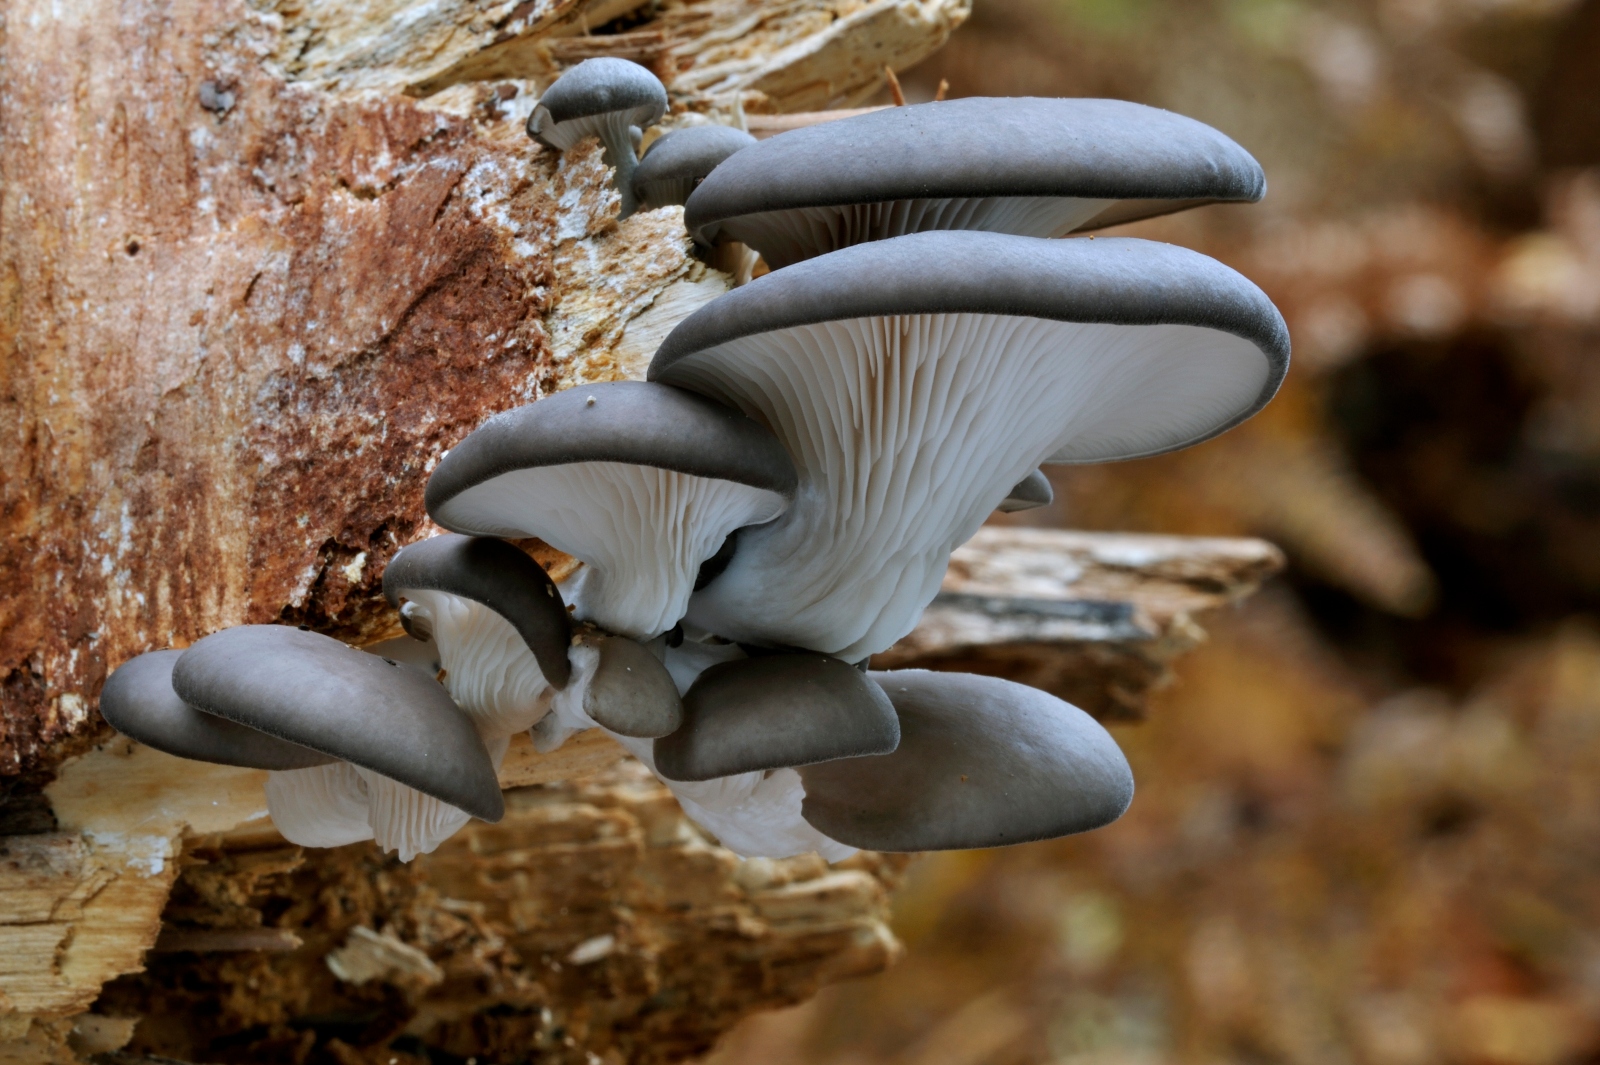 On a reddish tree, mushrooms with grey caps and white bellies grow in a clump.